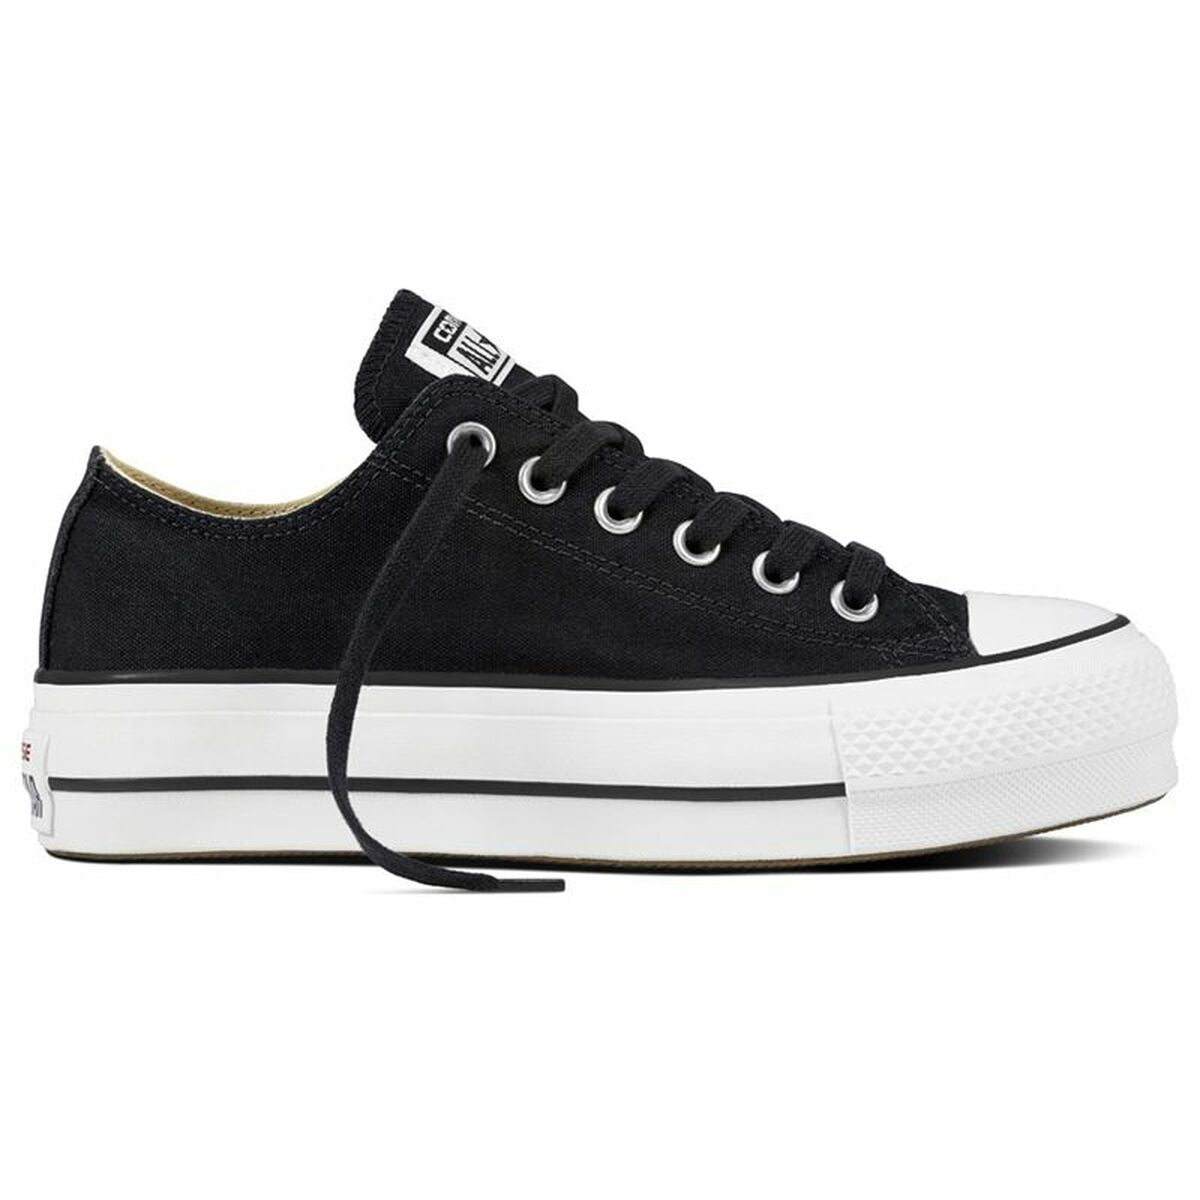 Women's casual trainers Chuck Taylor All Star Platform Converse 560250C Black (38)